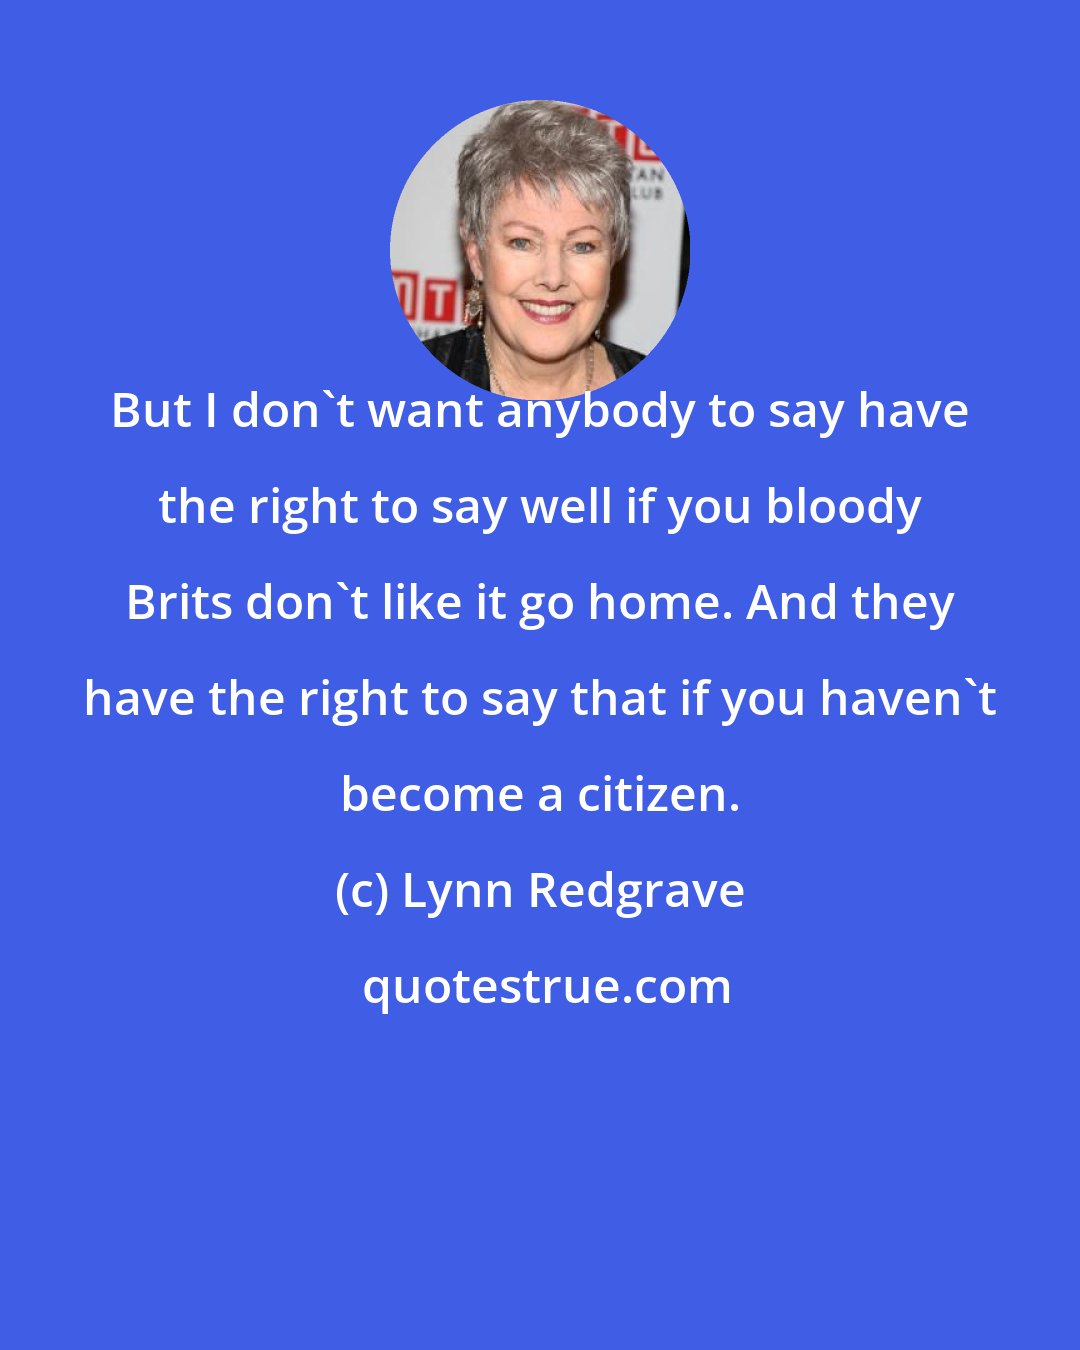 Lynn Redgrave: But I don't want anybody to say have the right to say well if you bloody Brits don't like it go home. And they have the right to say that if you haven't become a citizen.